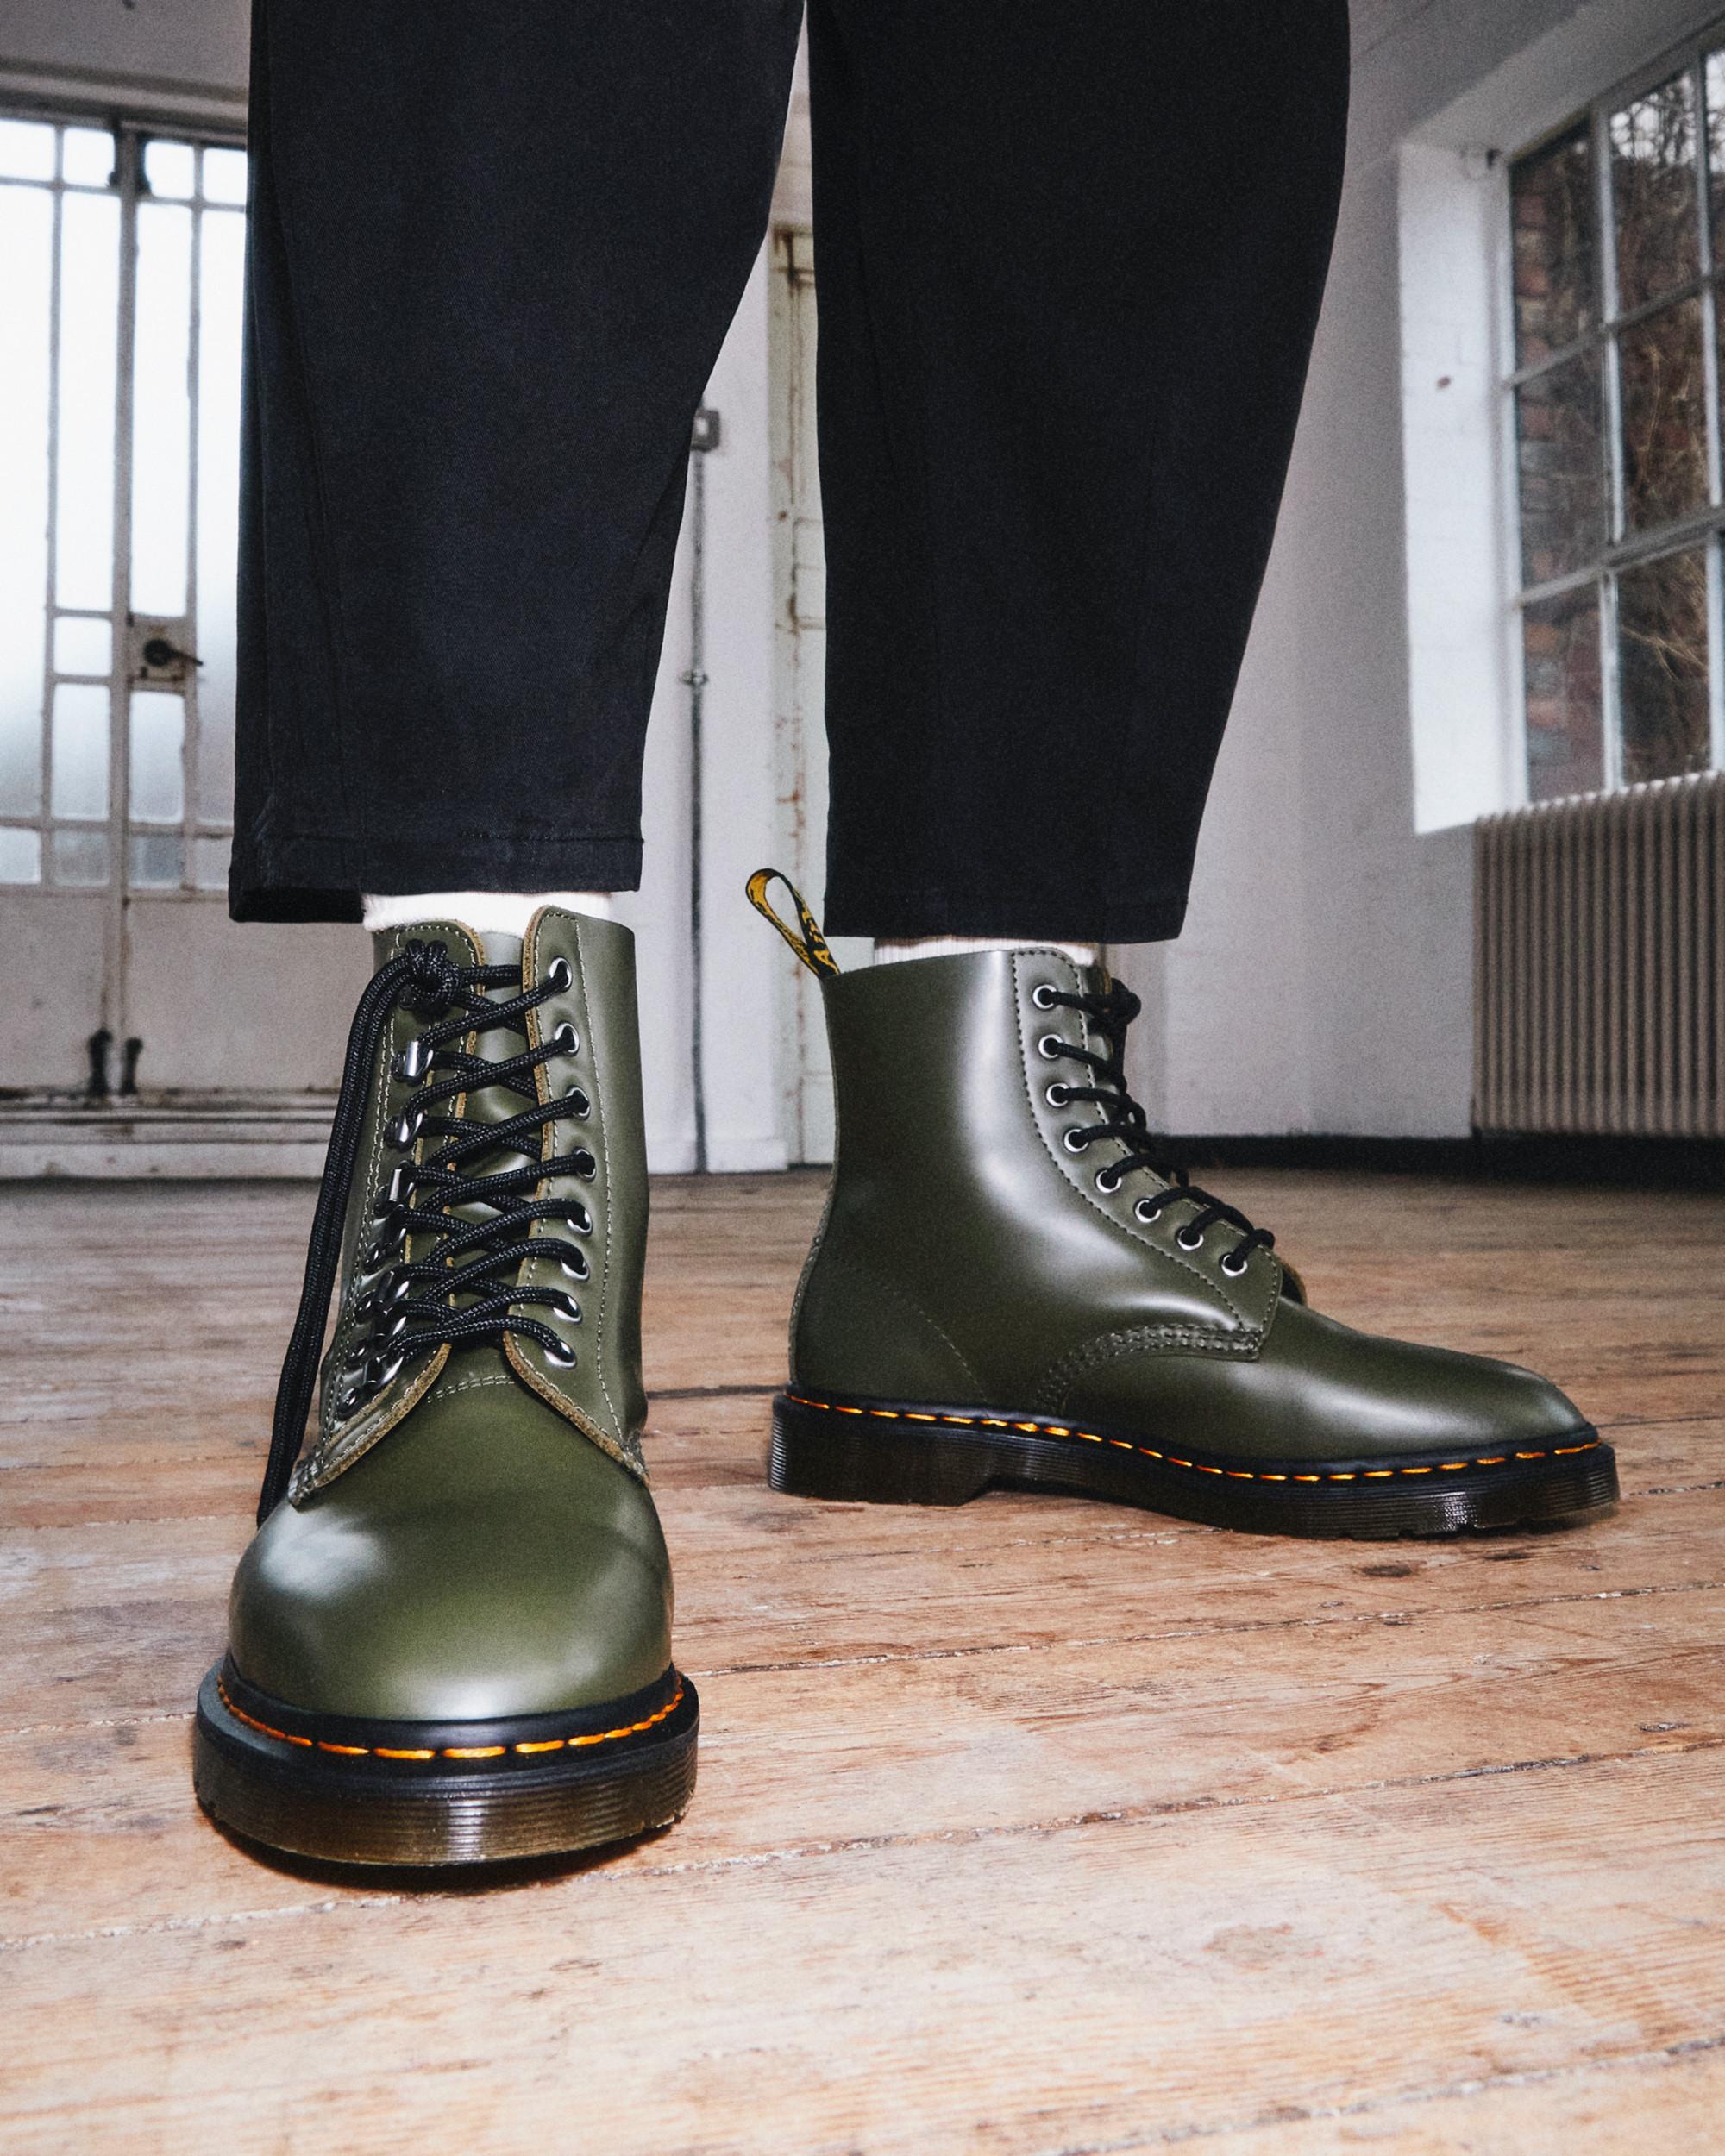 1460 Pascal Verso Smooth Leather Lace Up Boots | Dr. Martens